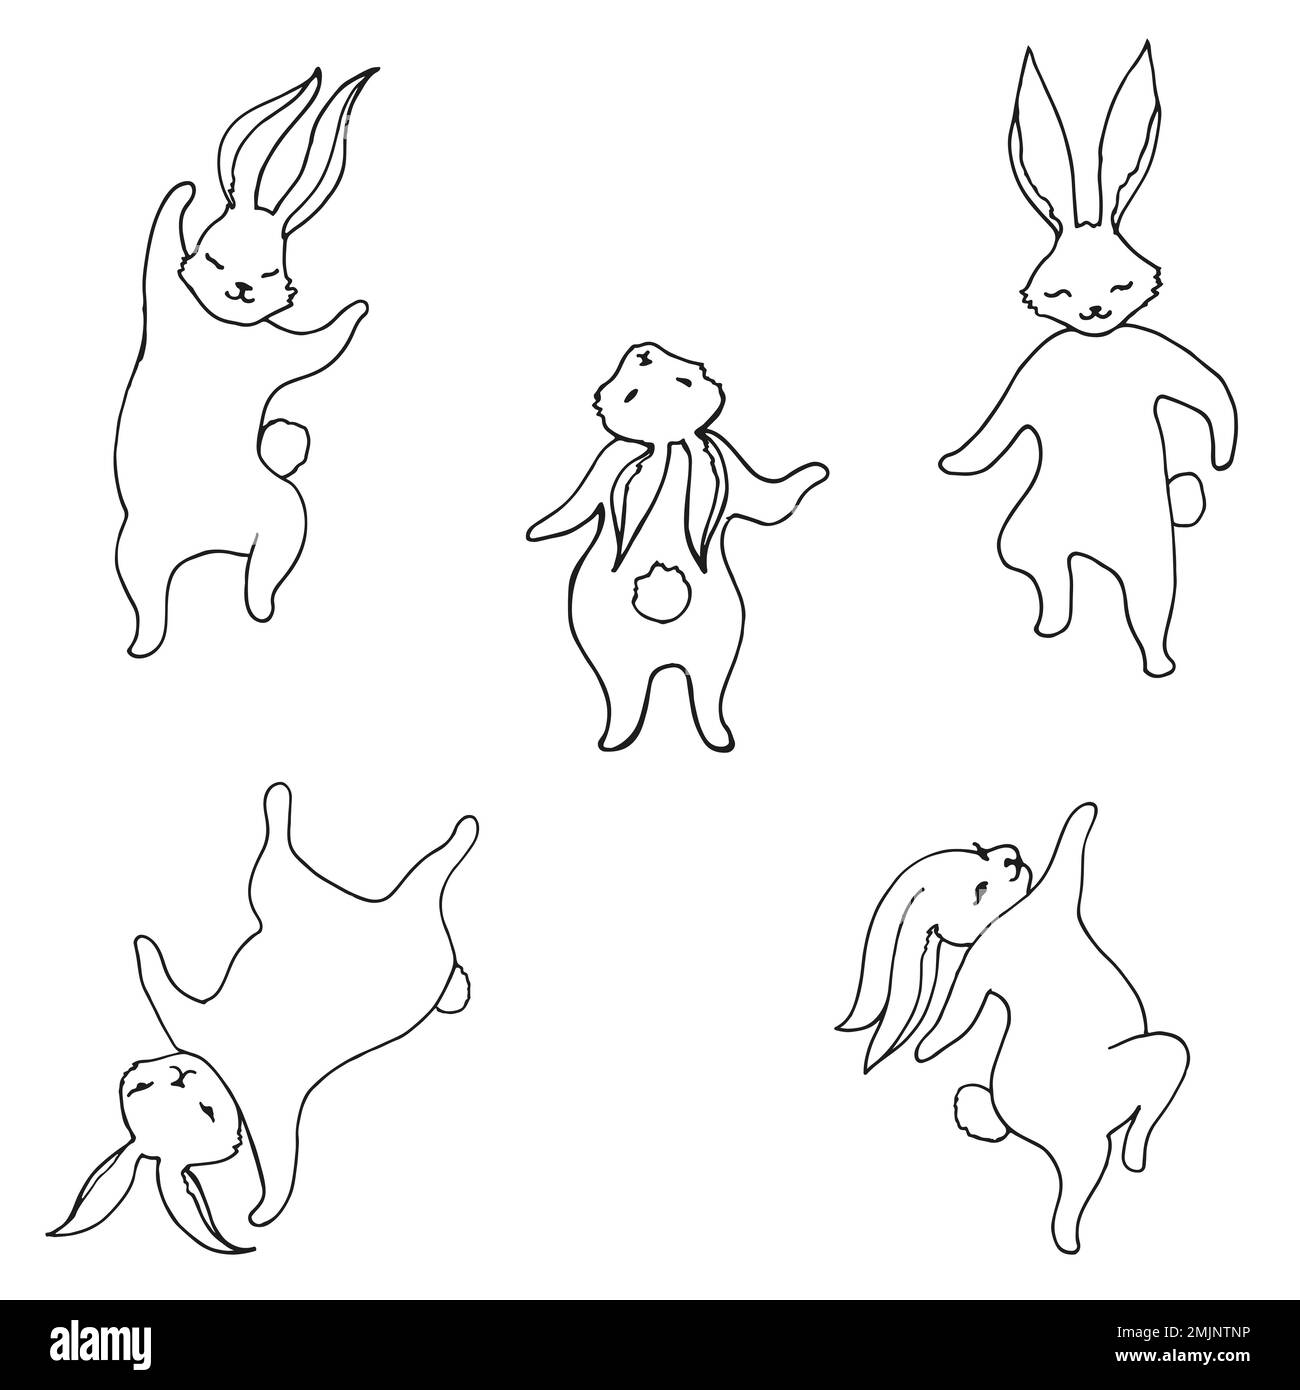 Coloring page with set rabbits funny dancing for kids and adult. Pattern isolated. Collection doodle cartoon happy animal. Hare symbol new year 2023. Stock Vector